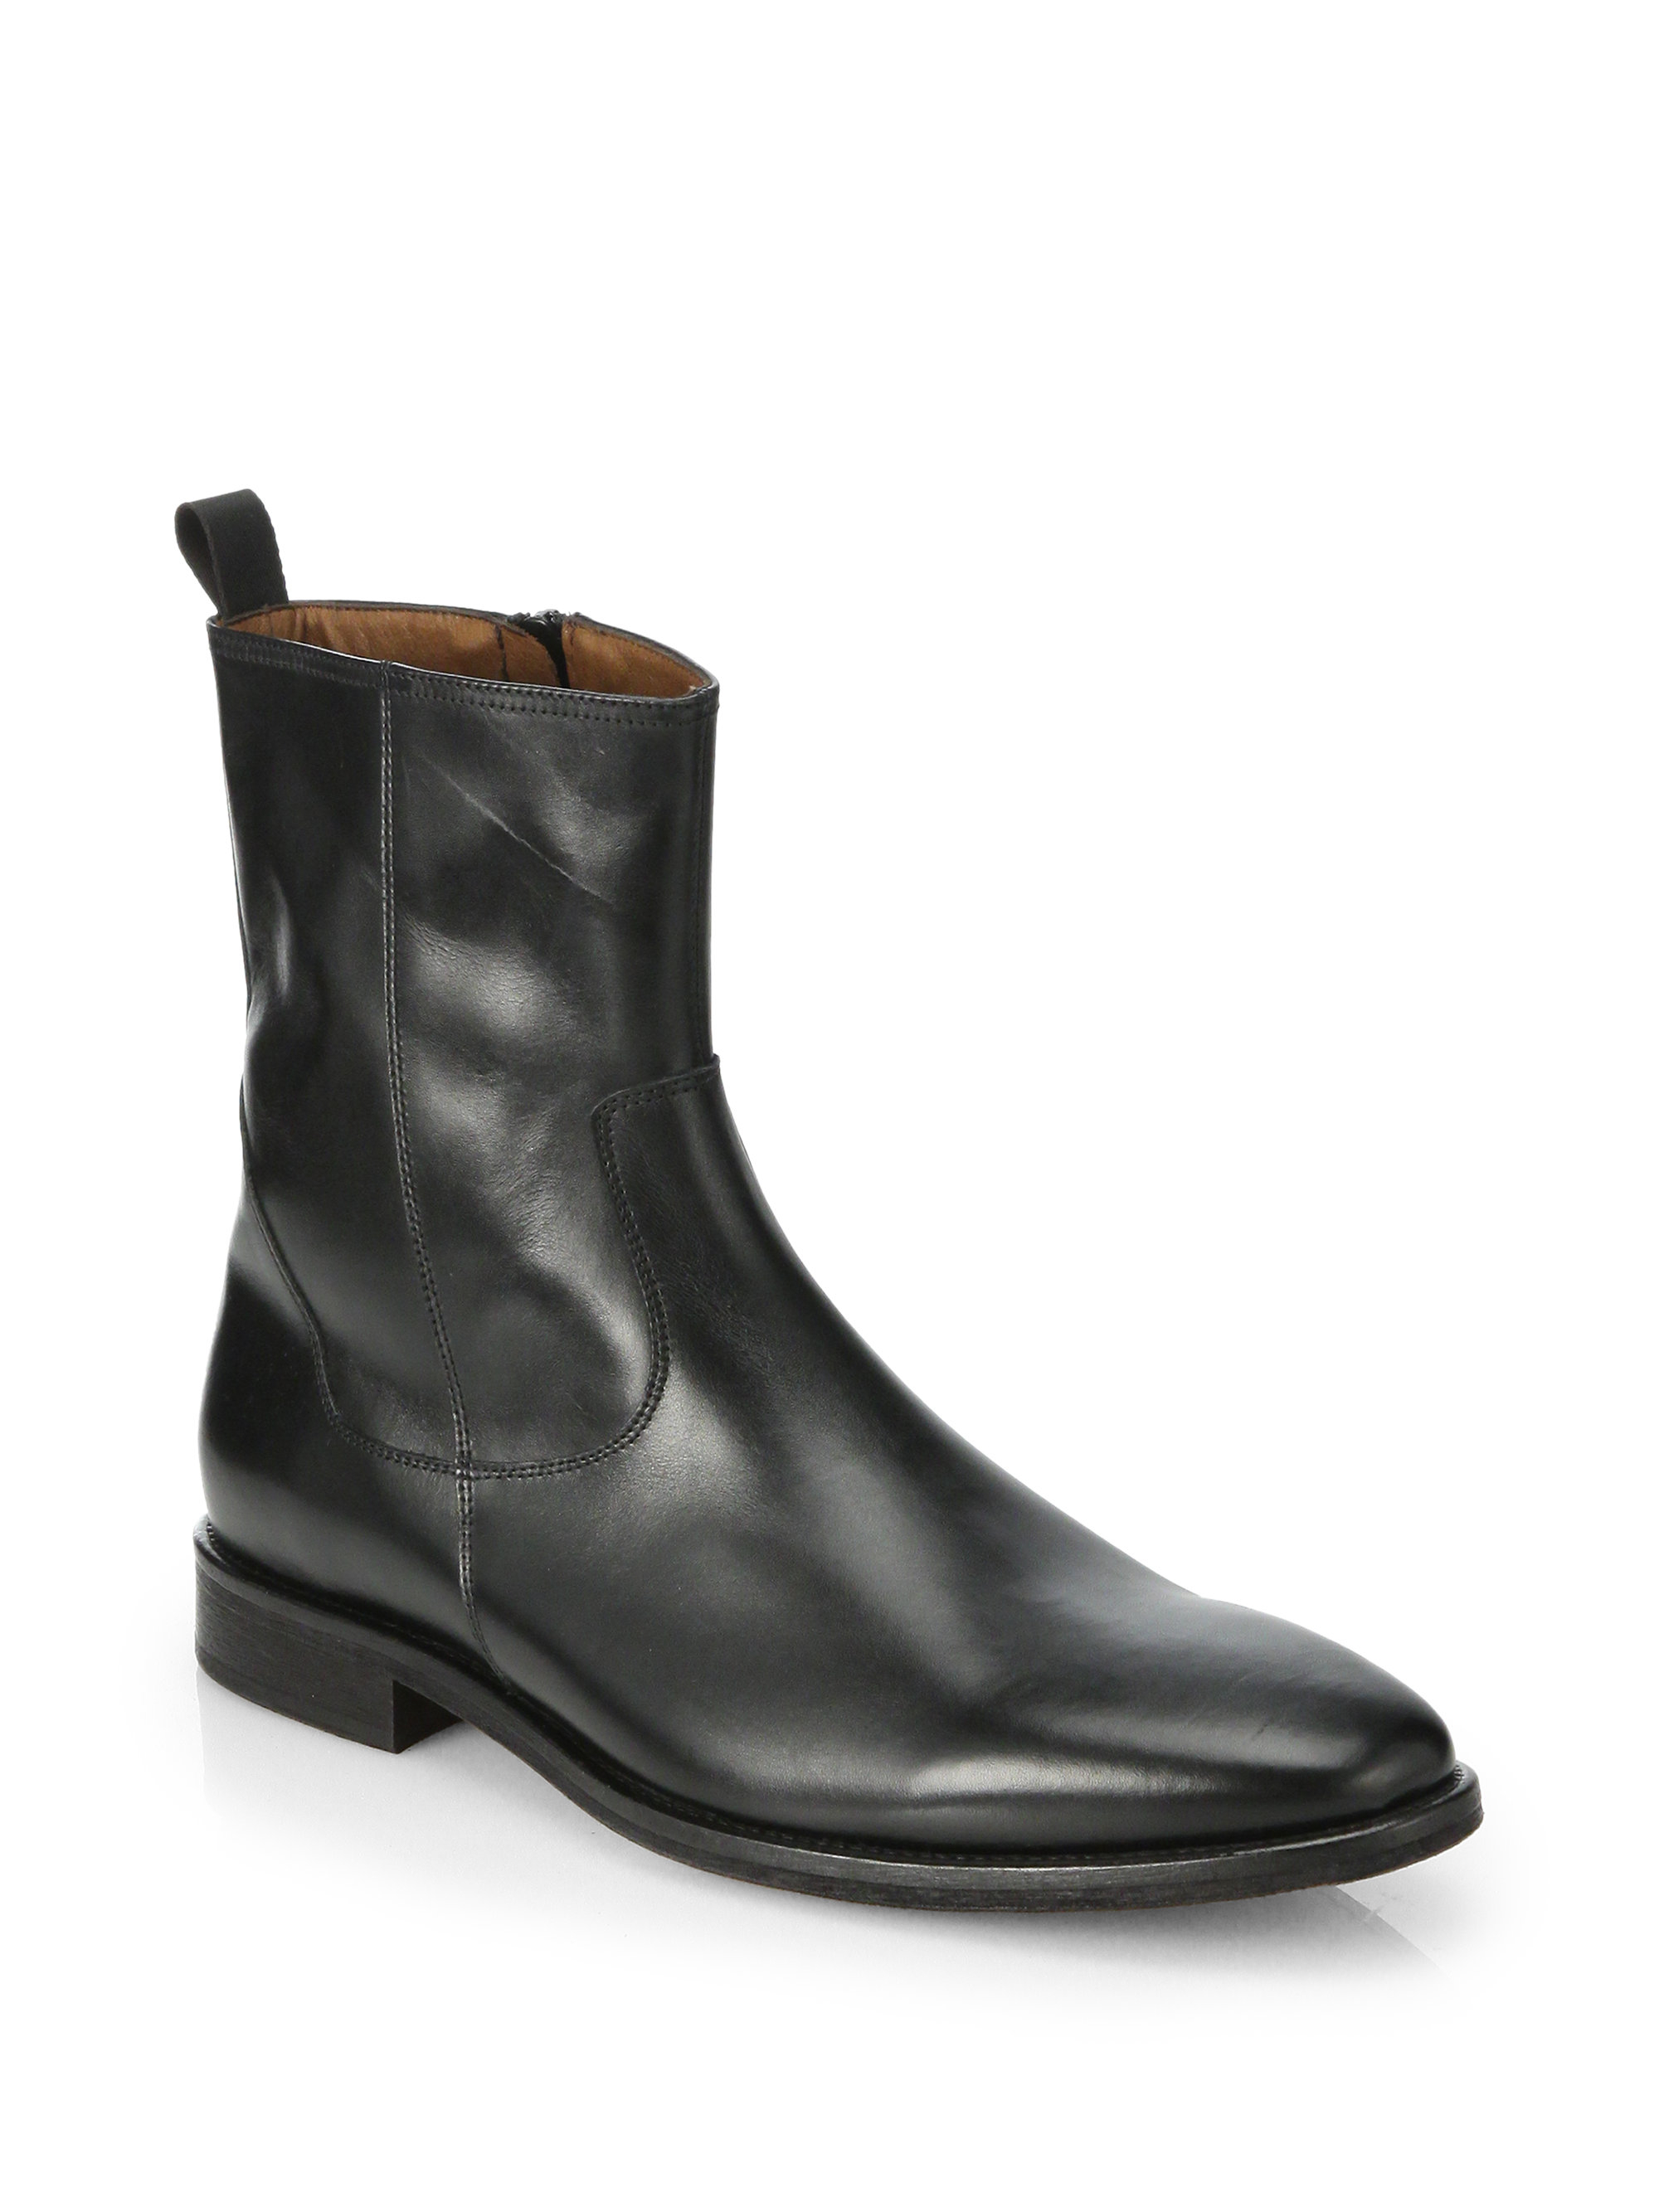 Saks Fifth Avenue Leather Side-Zip Boots in Black for Men - Lyst